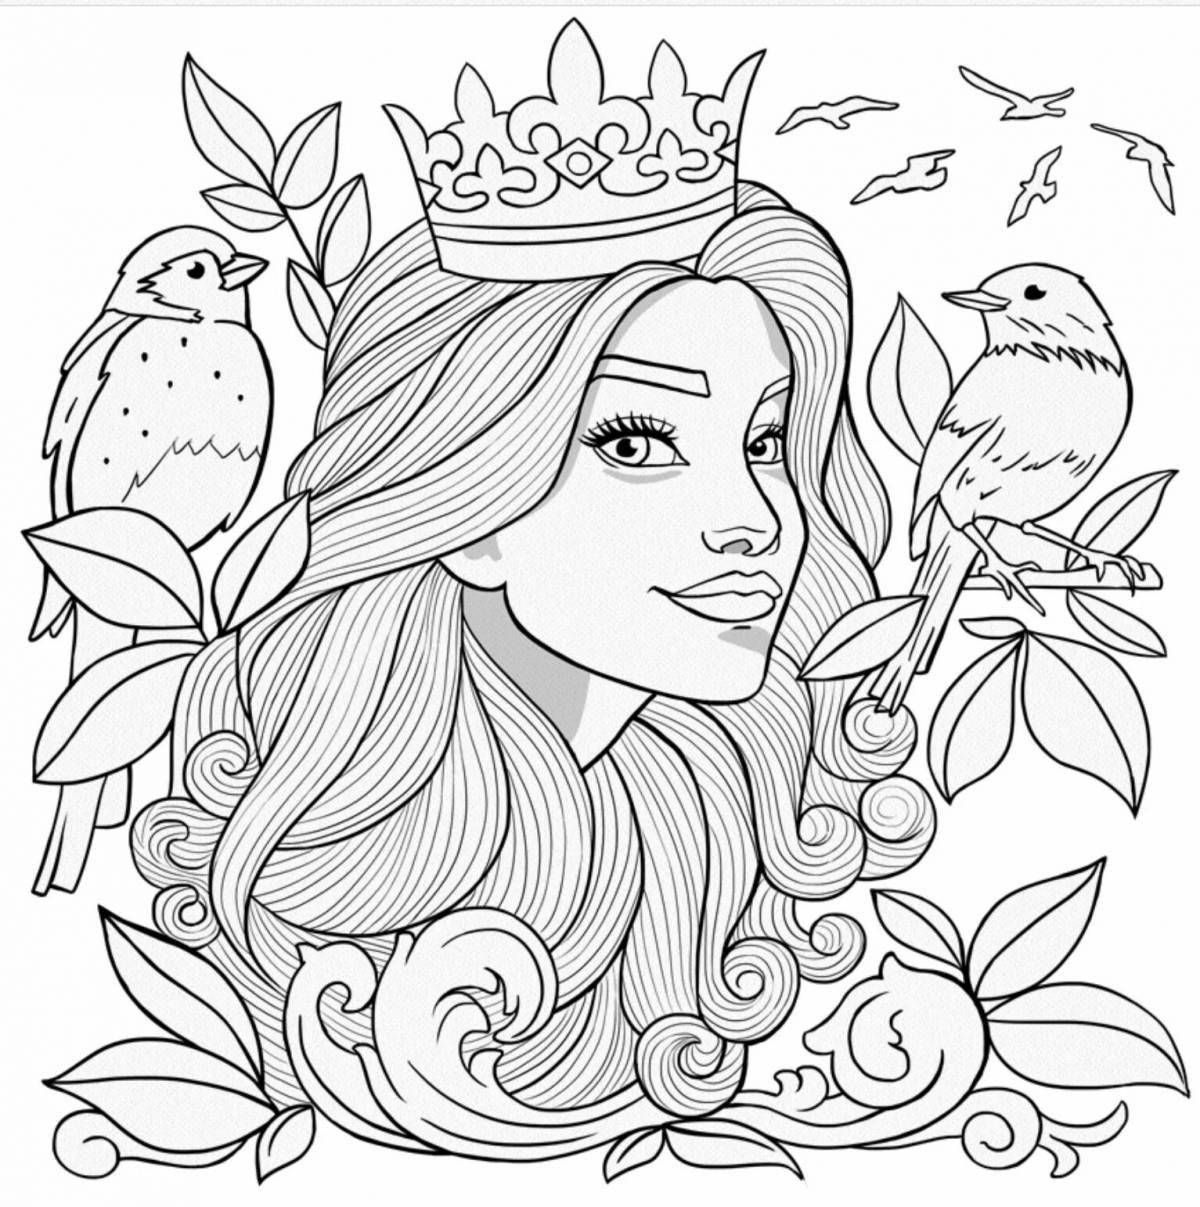 Deluxe coloring book popular with 12 year old girls